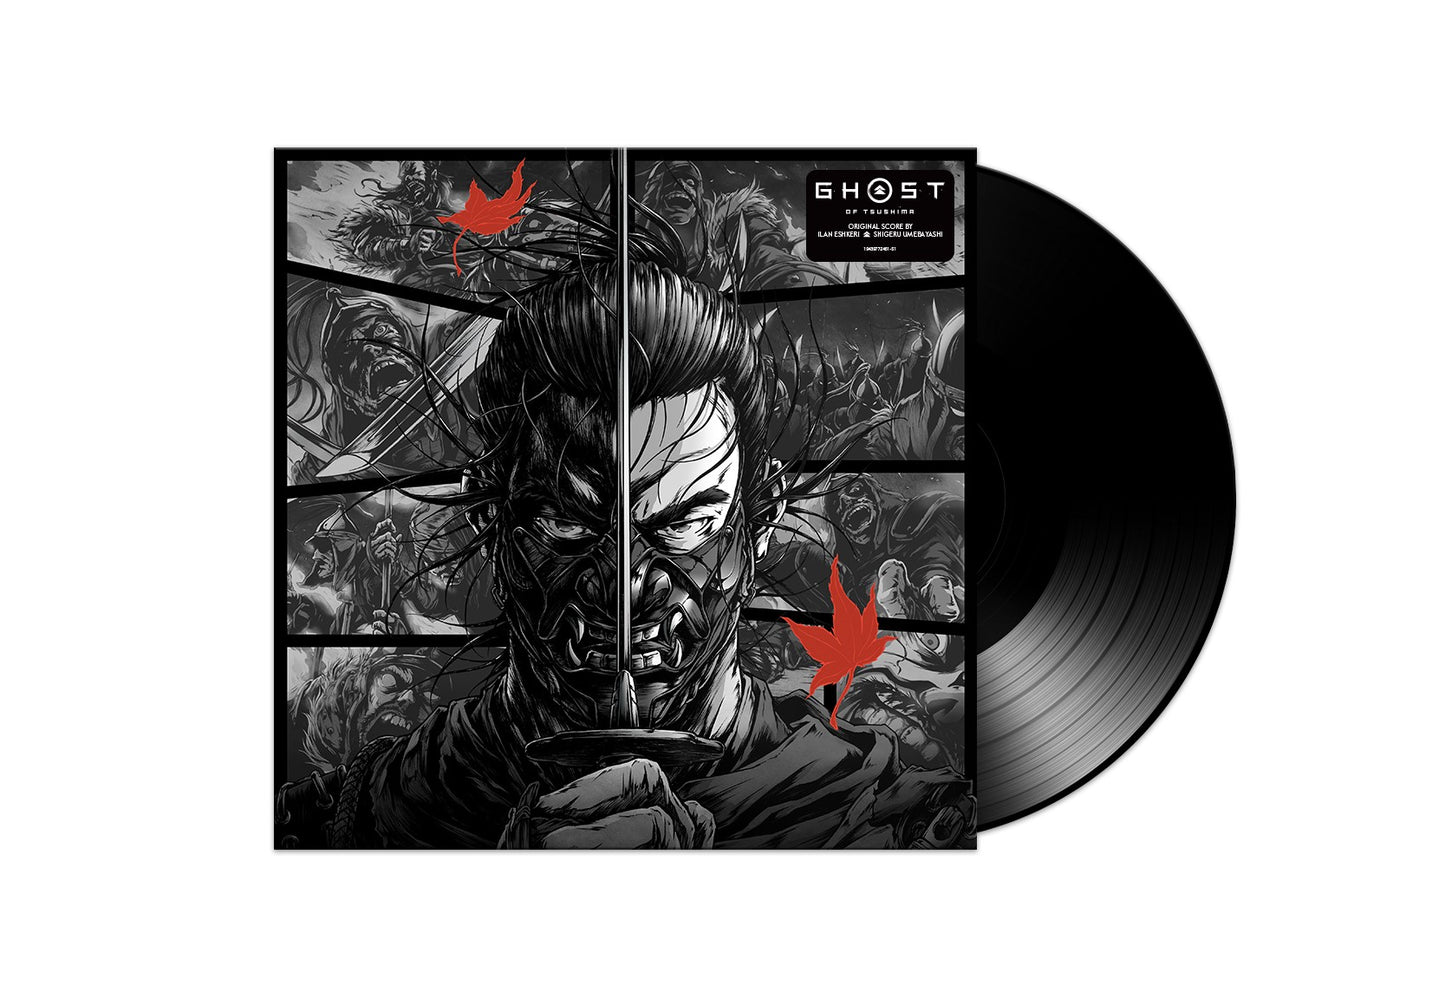 Ghost of Tsushima (Music from the Video Game) - 3X LP